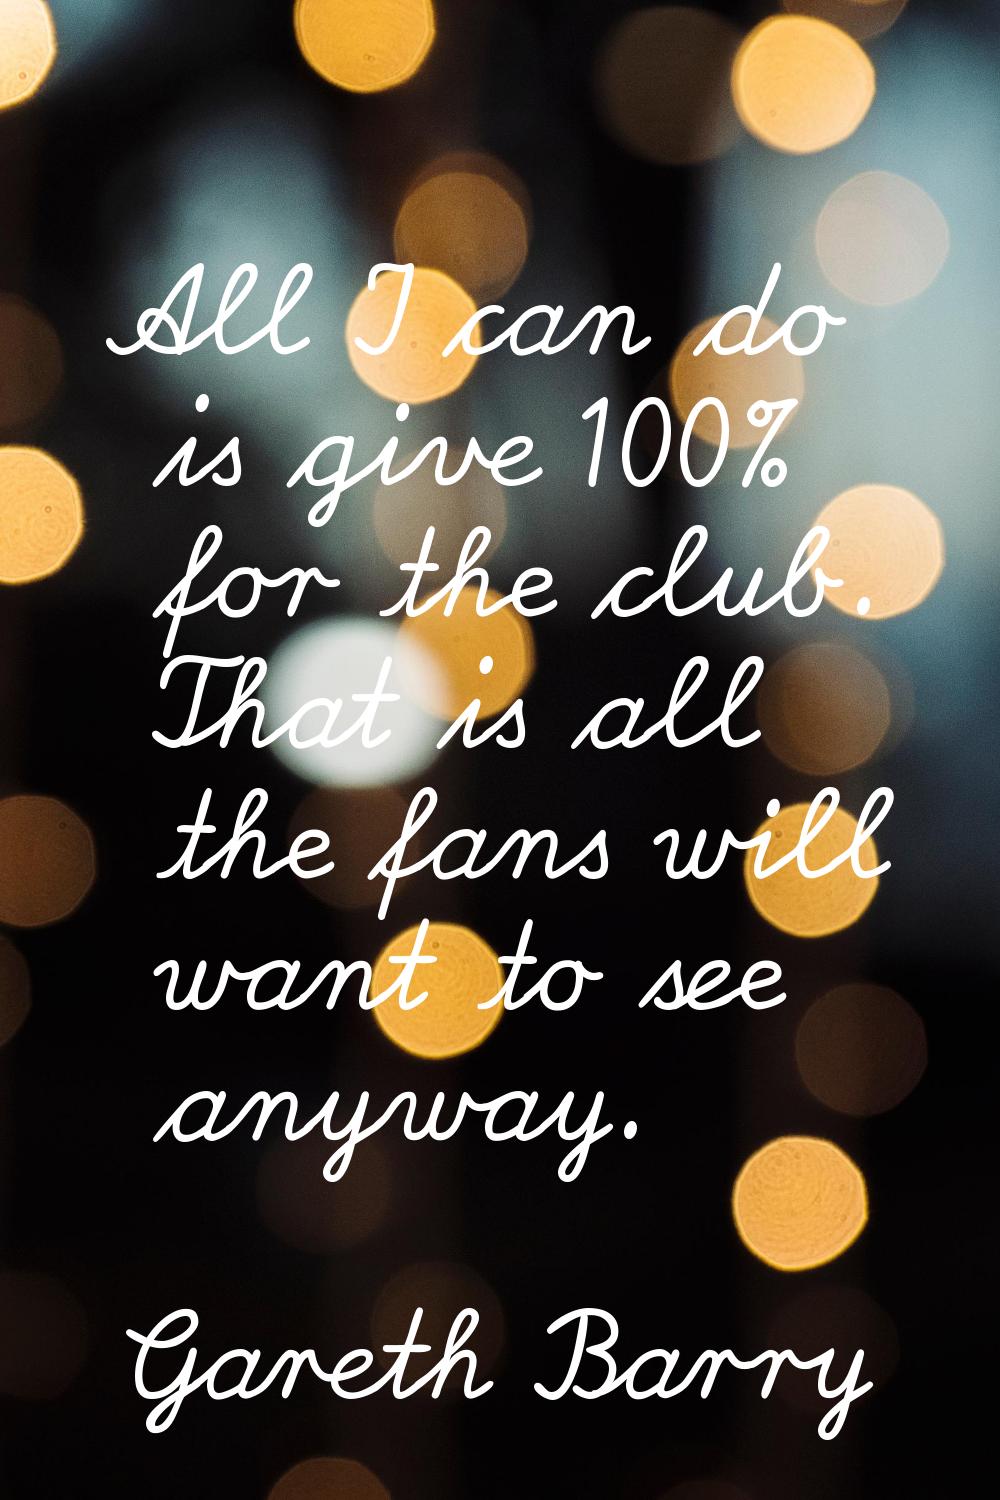 All I can do is give 100% for the club. That is all the fans will want to see anyway.